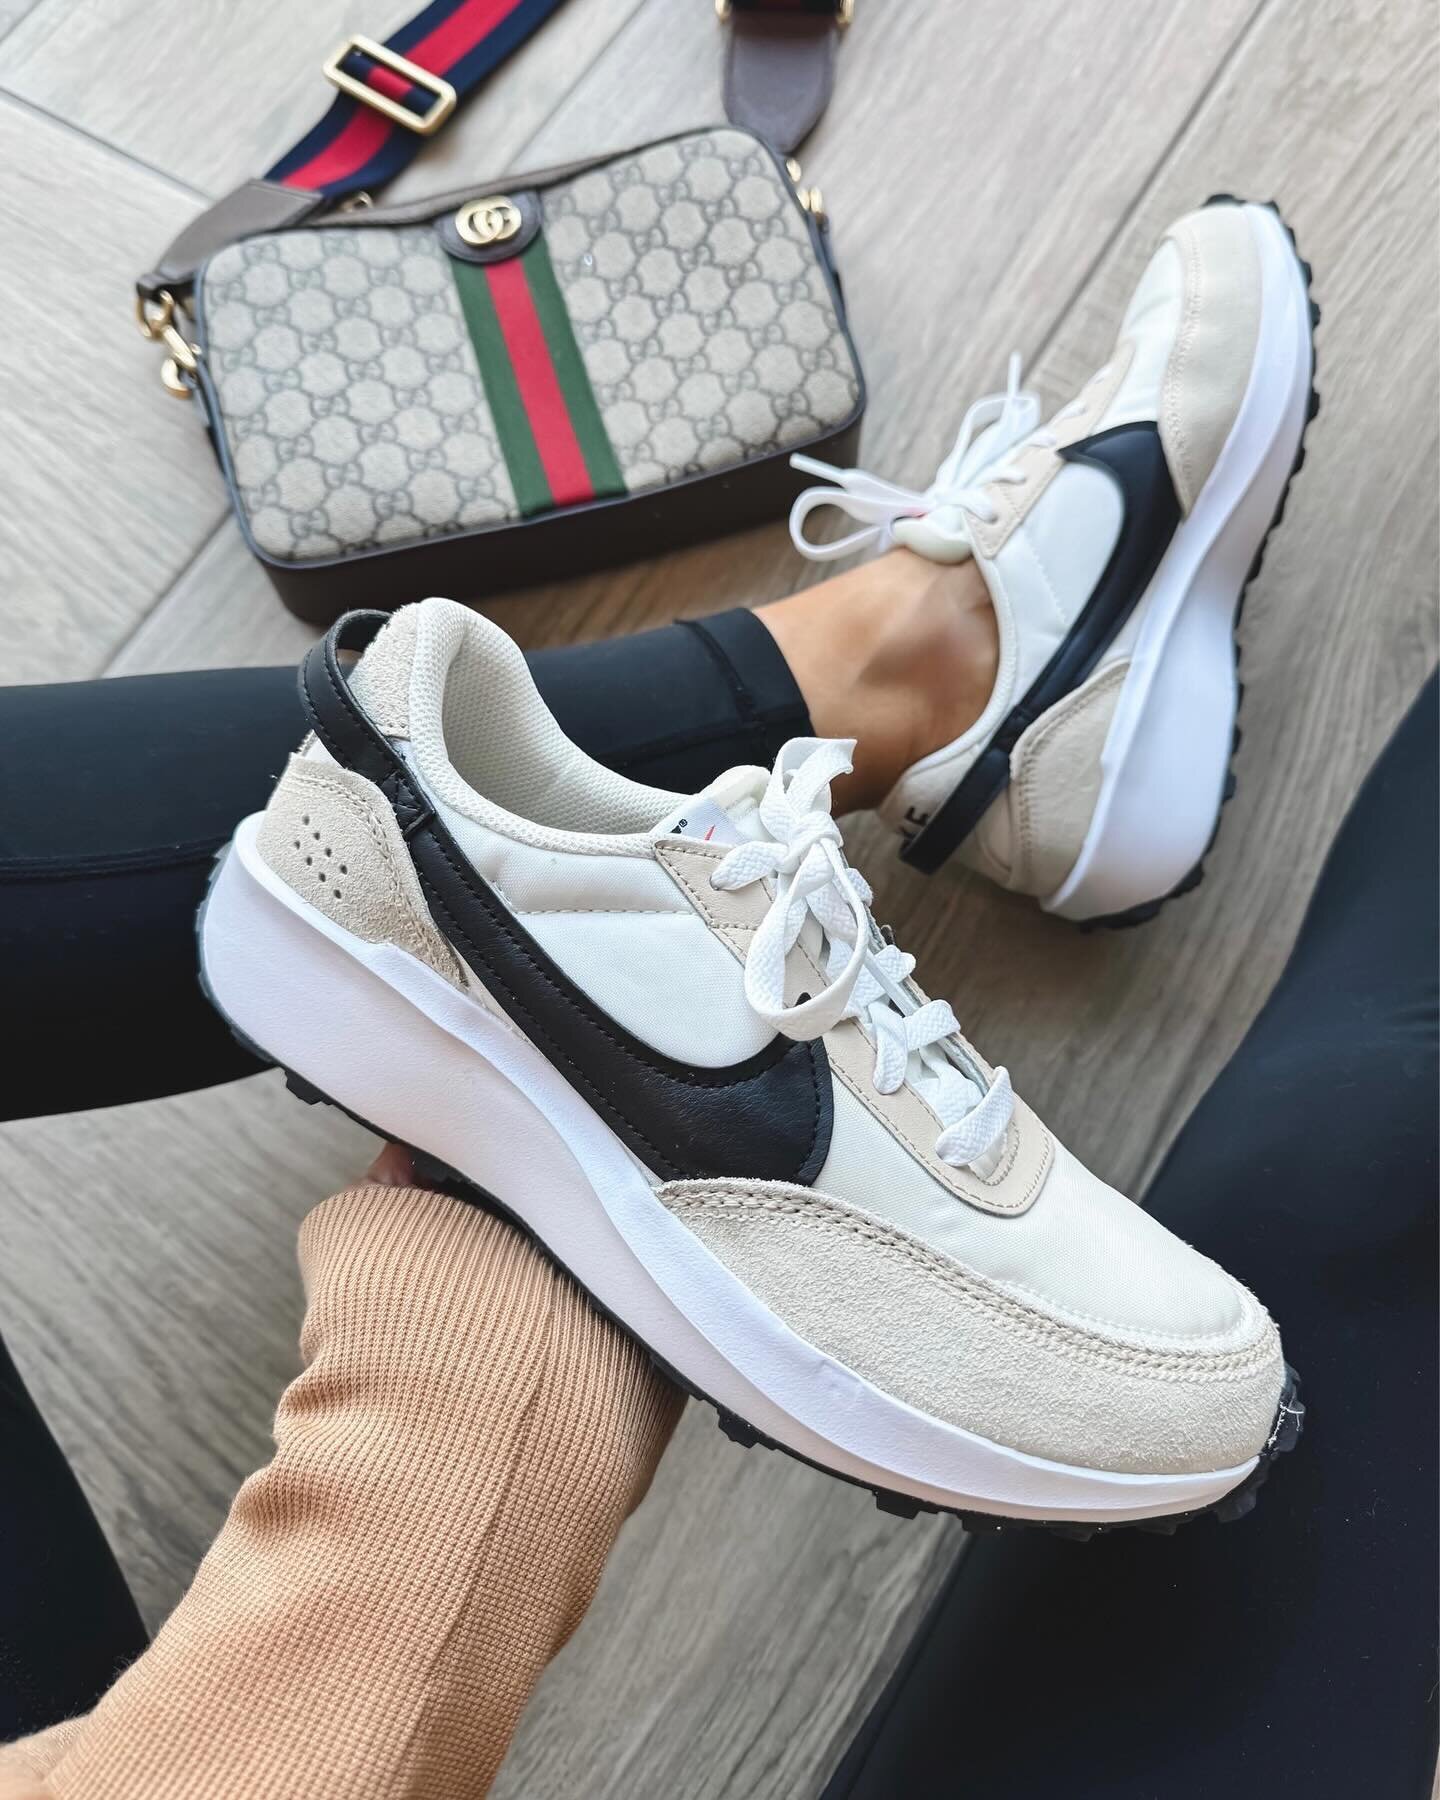 Restocked and only $75!
✨Comment LINKS for details to shop this pic, sent straight to your dm.

You can also shop via the link in my bio&hellip;Follow me @liveloveblank for more 

Nike sneaker 
Athletic wear
Casual outfit
Street style
Everyday sneake